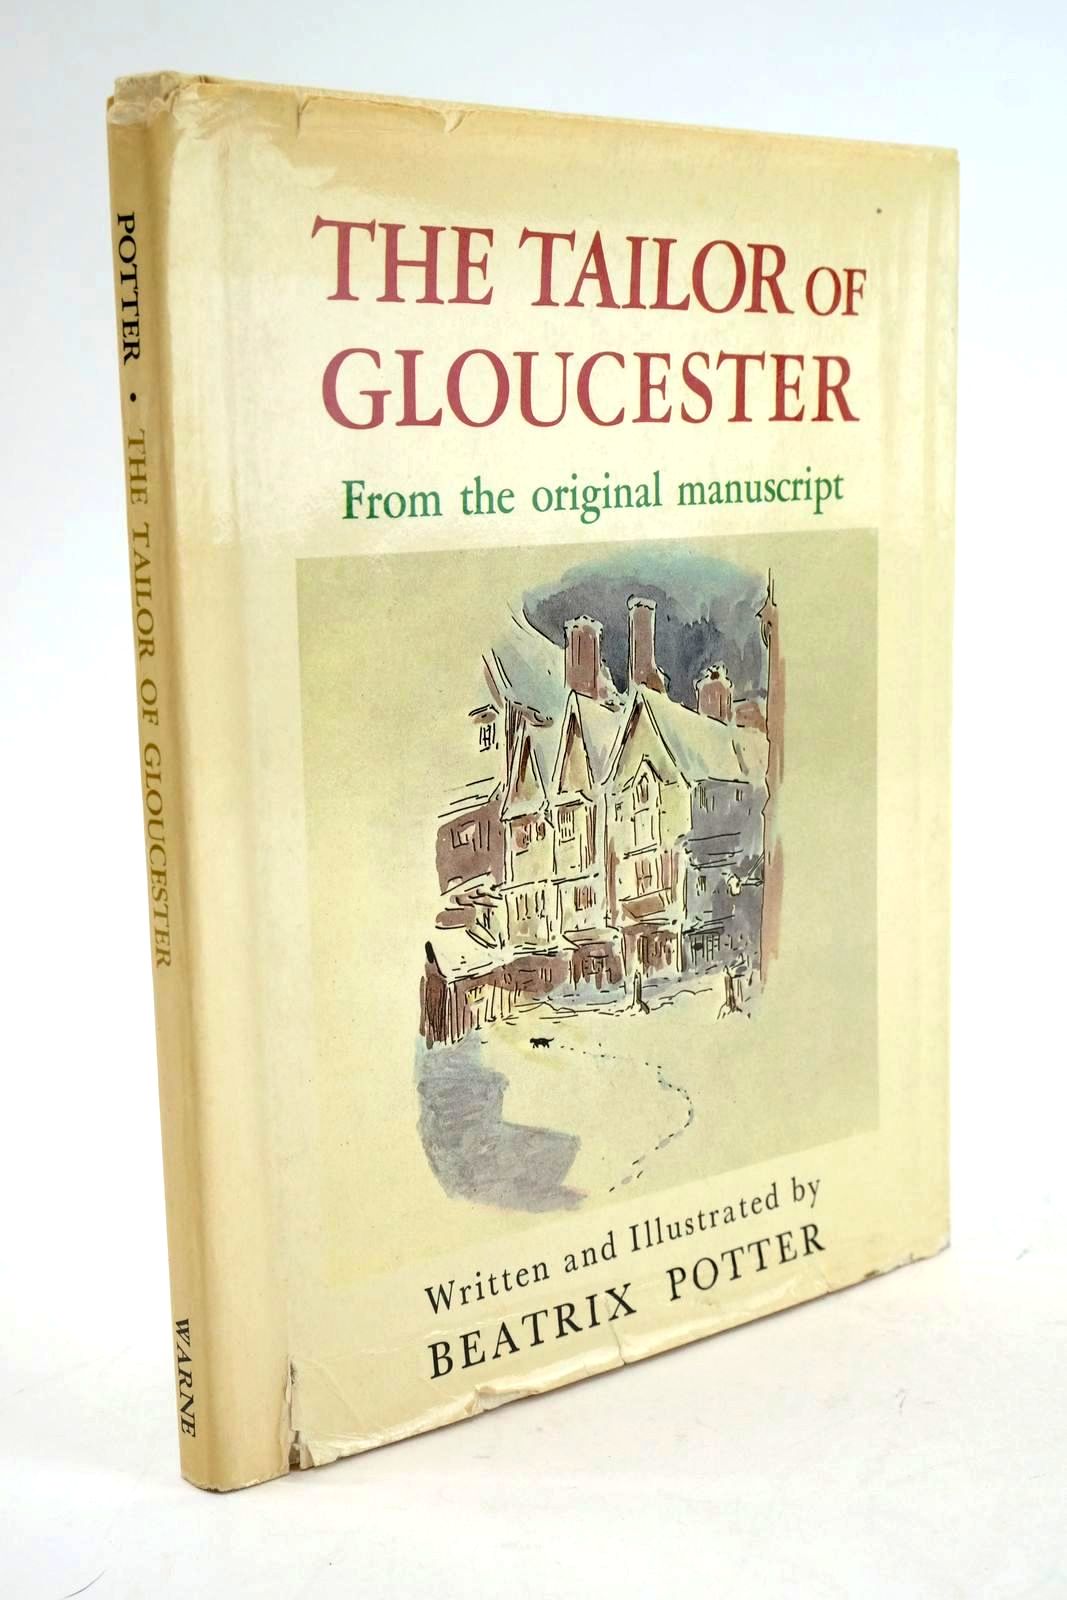 Photo of THE TAILOR OF GLOUCESTER FROM THE ORIGINAL MANUSCRIPT written by Potter, Beatrix illustrated by Potter, Beatrix published by Frederick Warne & Co Ltd. (STOCK CODE: 1324230)  for sale by Stella & Rose's Books